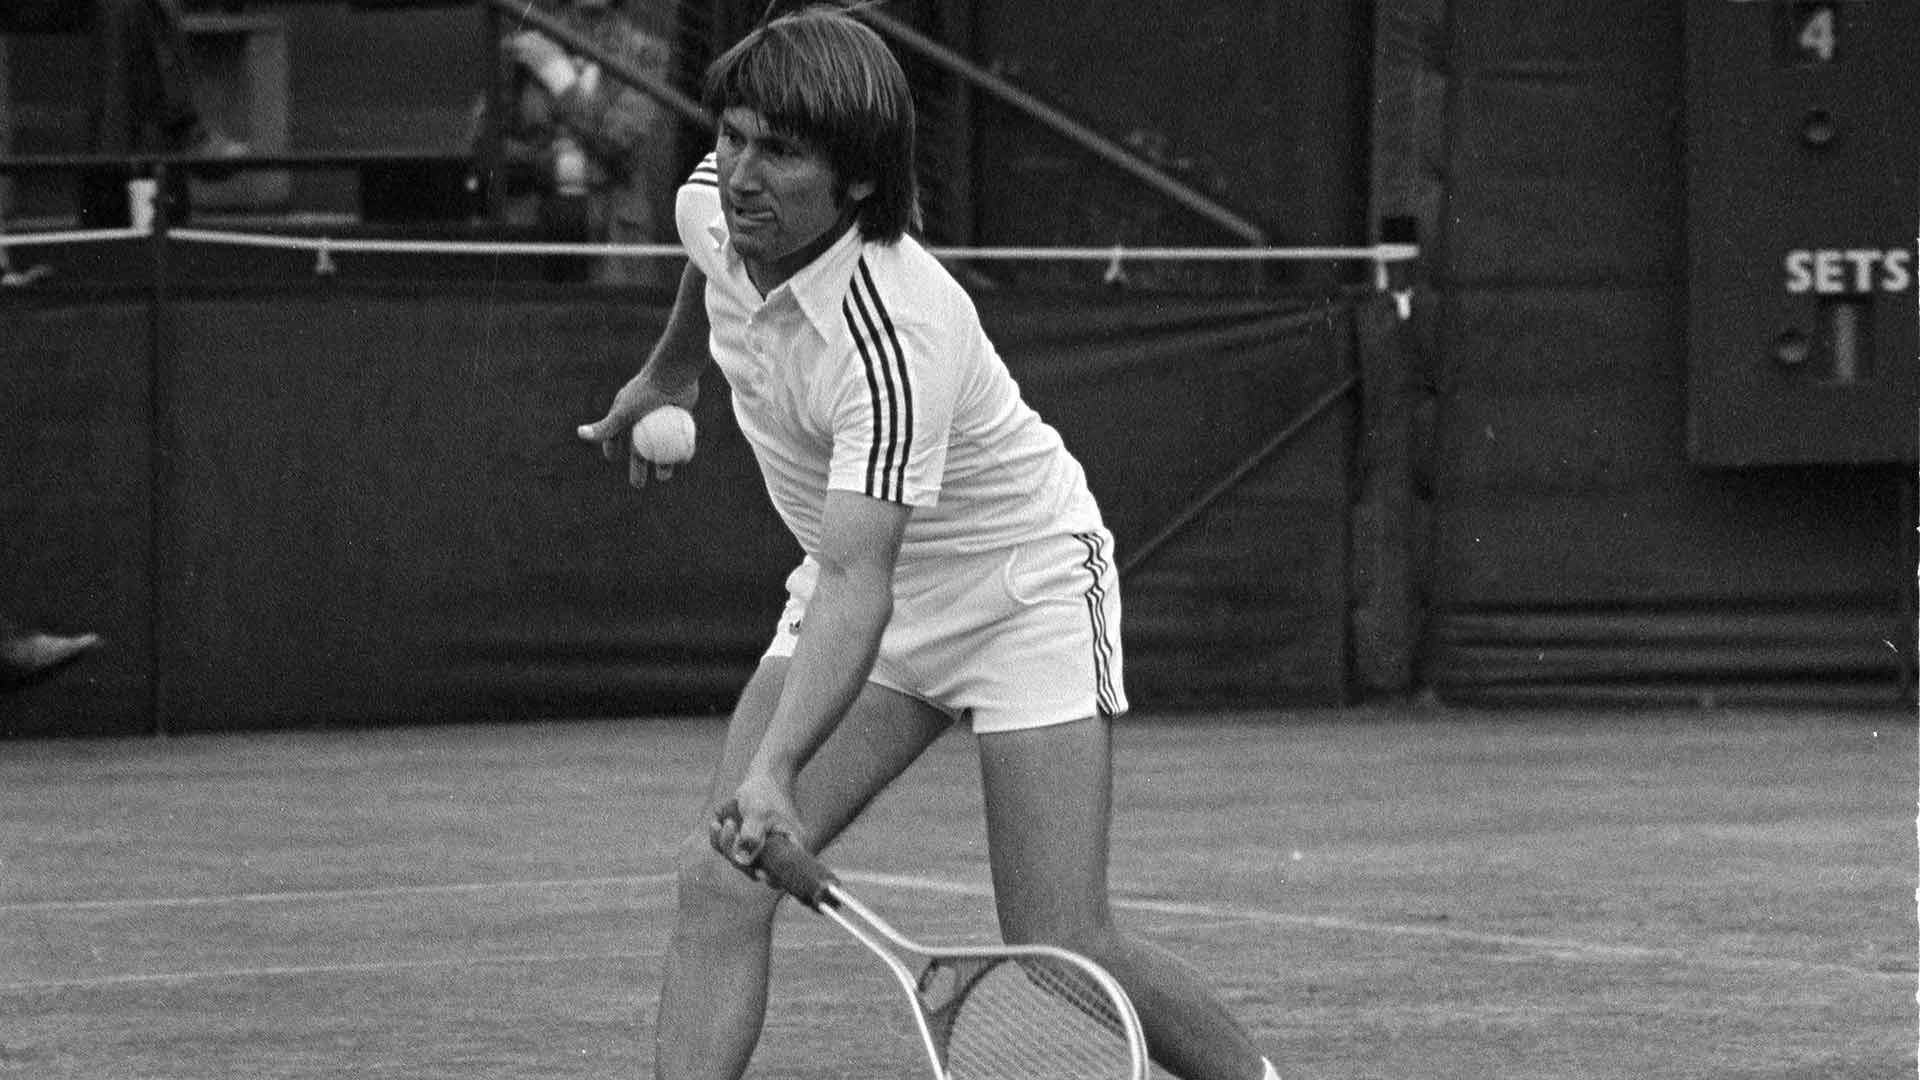 Barry Phillips-Moore was the earliest adopter of the 'spaghetti-string' racquet.